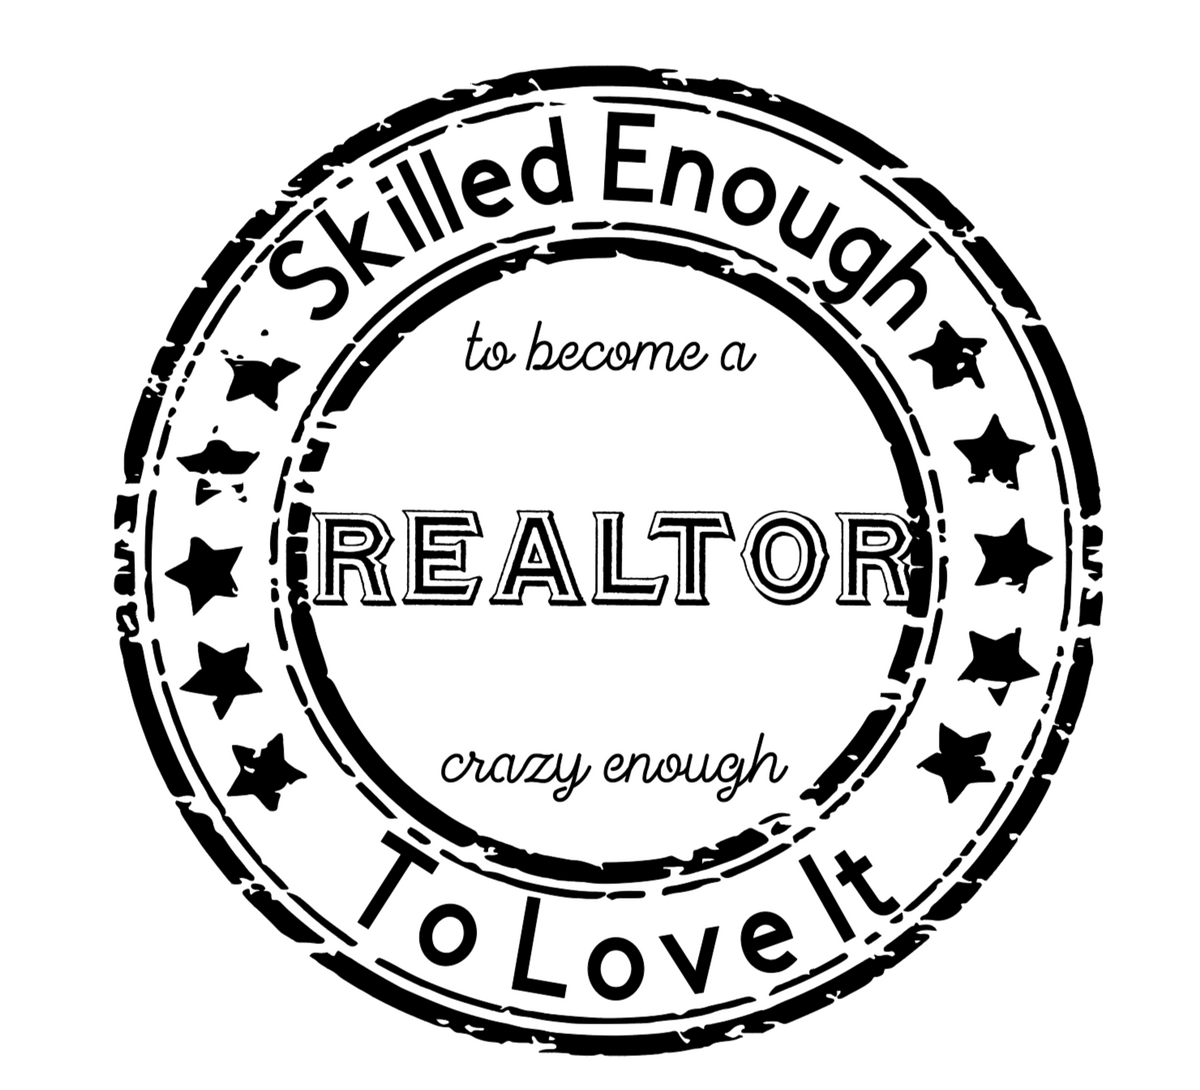 Skilled Enough to be a Realtor vinyl decal sticker